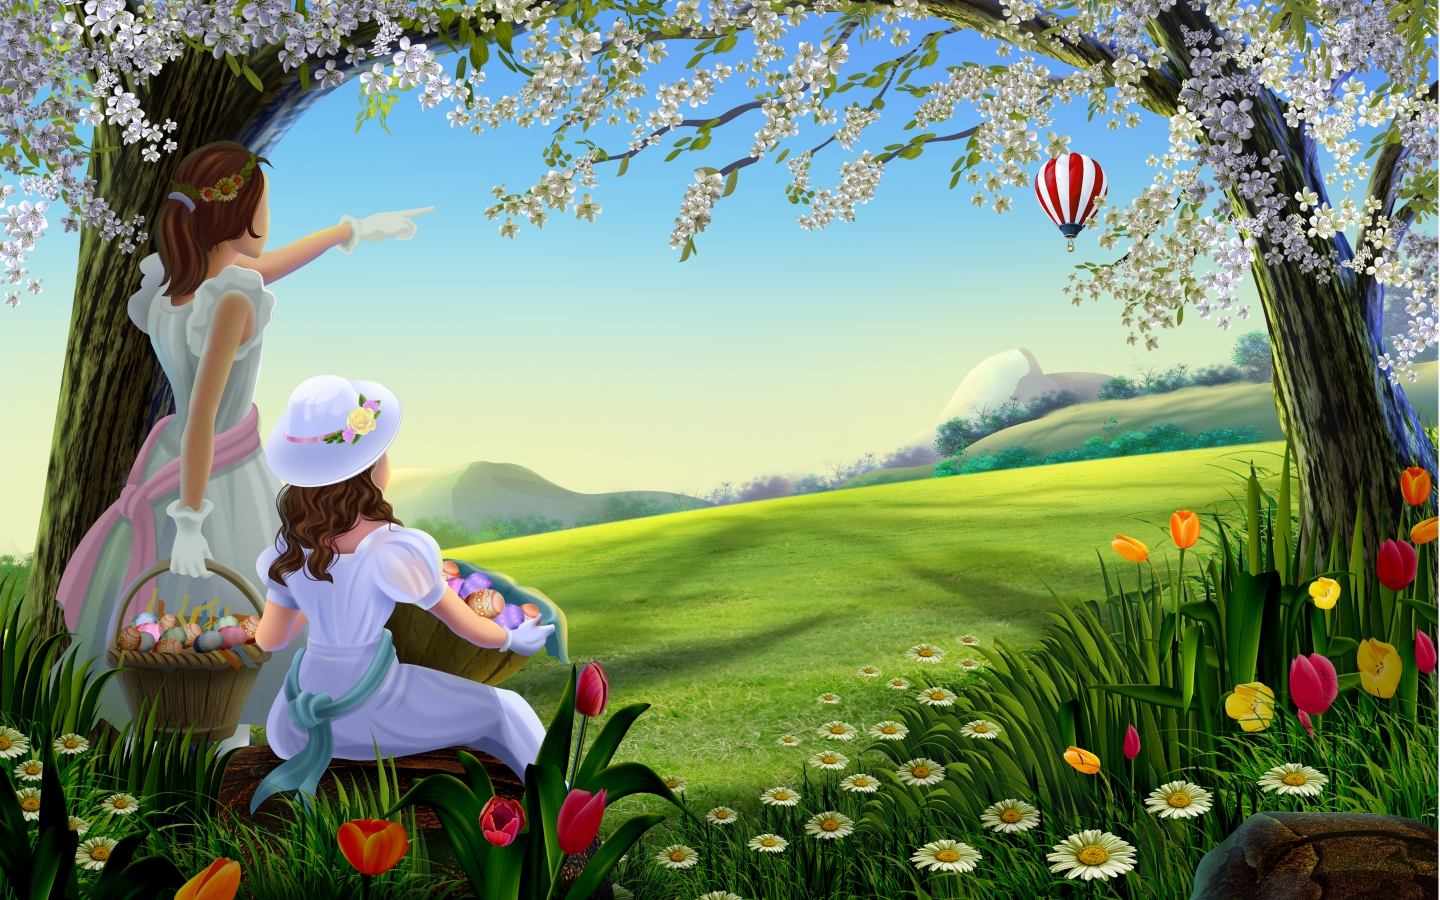 Amazing Spring Painting for 1440 x 900 widescreen resolution